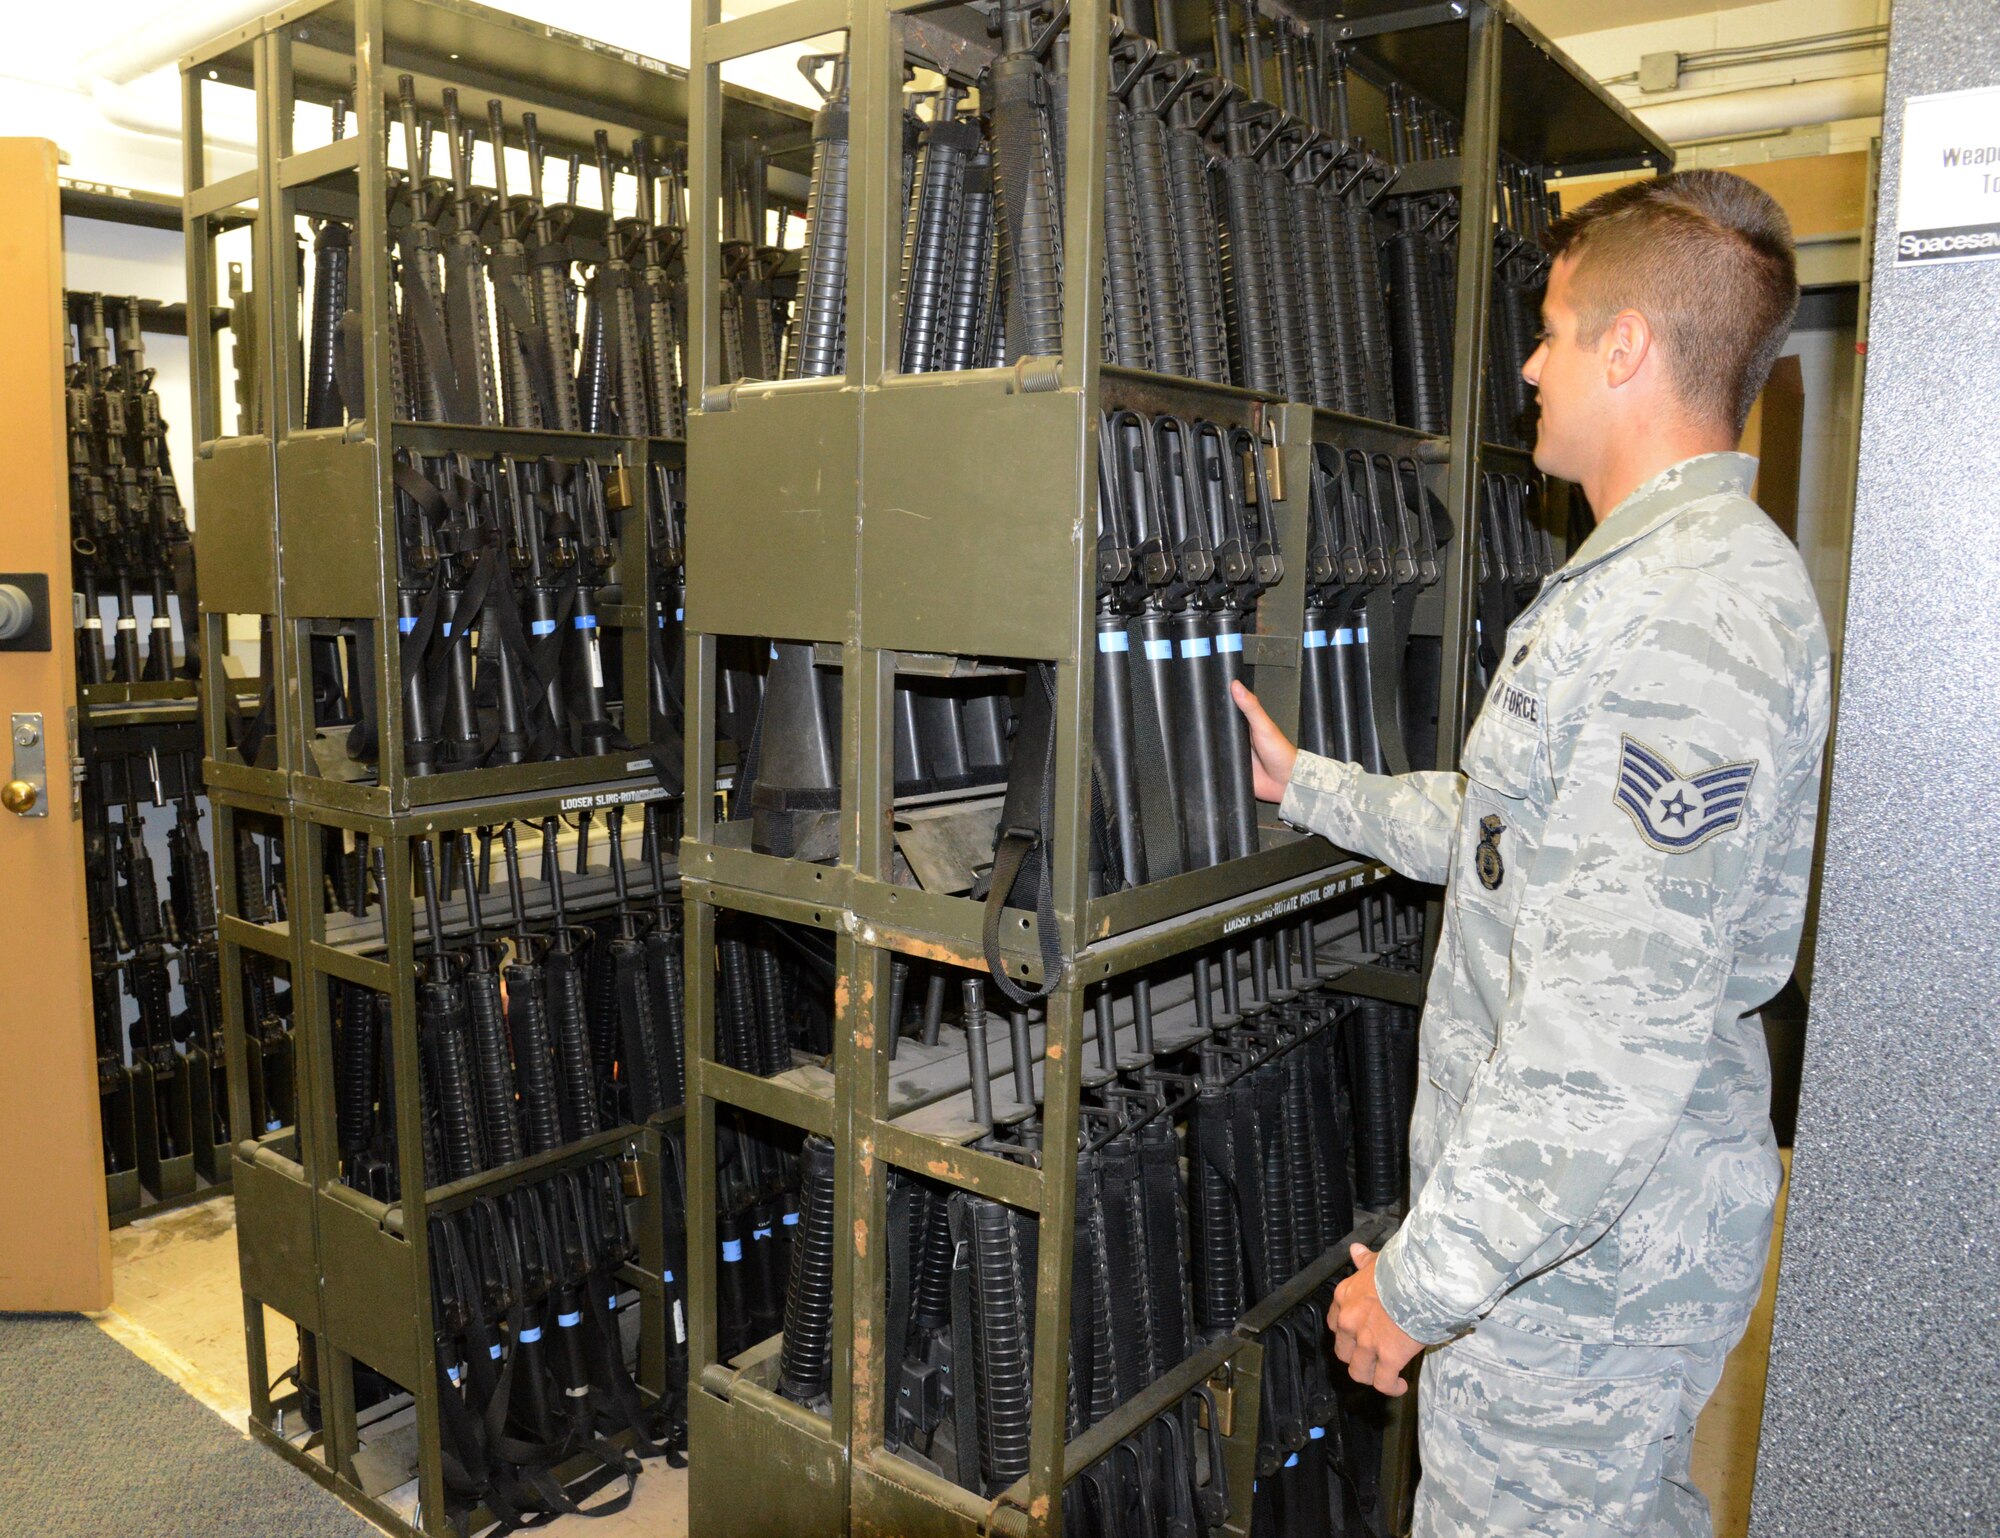 Staff Sgt. Michael Enerud retrieves a weapon from a new section of inventory in the Security Forces armory. He, along with the other SFS members who work there, took the initiative to reorganize the area to make it more efficient for SFS members needing to check in/out weapons and ammunition for their shifts. The ‘Just Do It’ initiative will save the government more than $373,000 a year. 
(Air Force photo by Kelly White)
